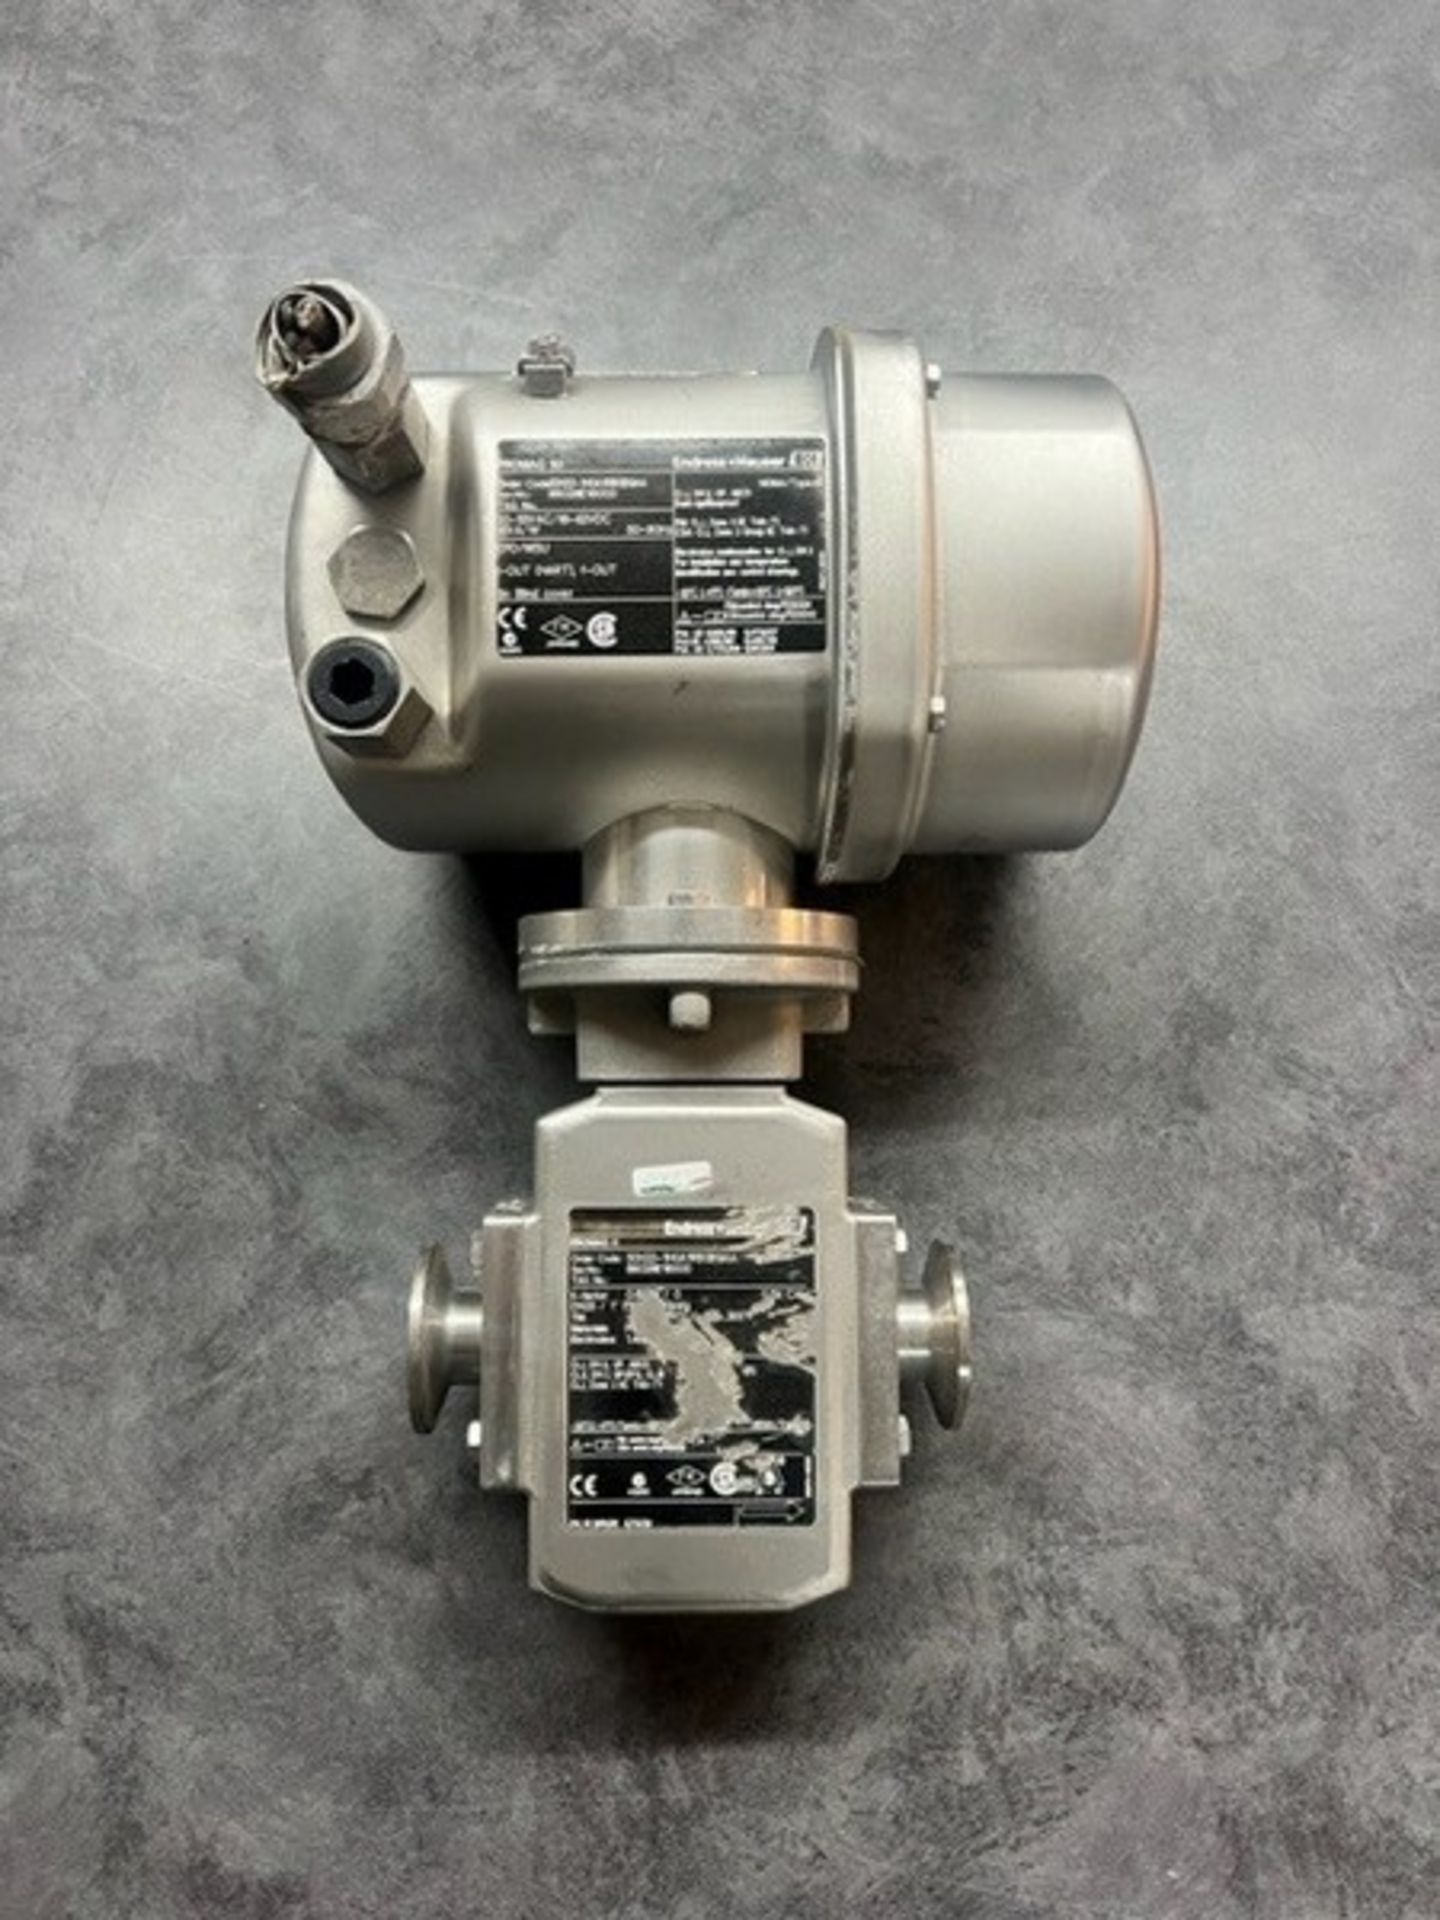 Endress Hauser 1" ProMag 50, S/N 86028E16000 (Load Fee $50) (Located Harrodsburg, KY)